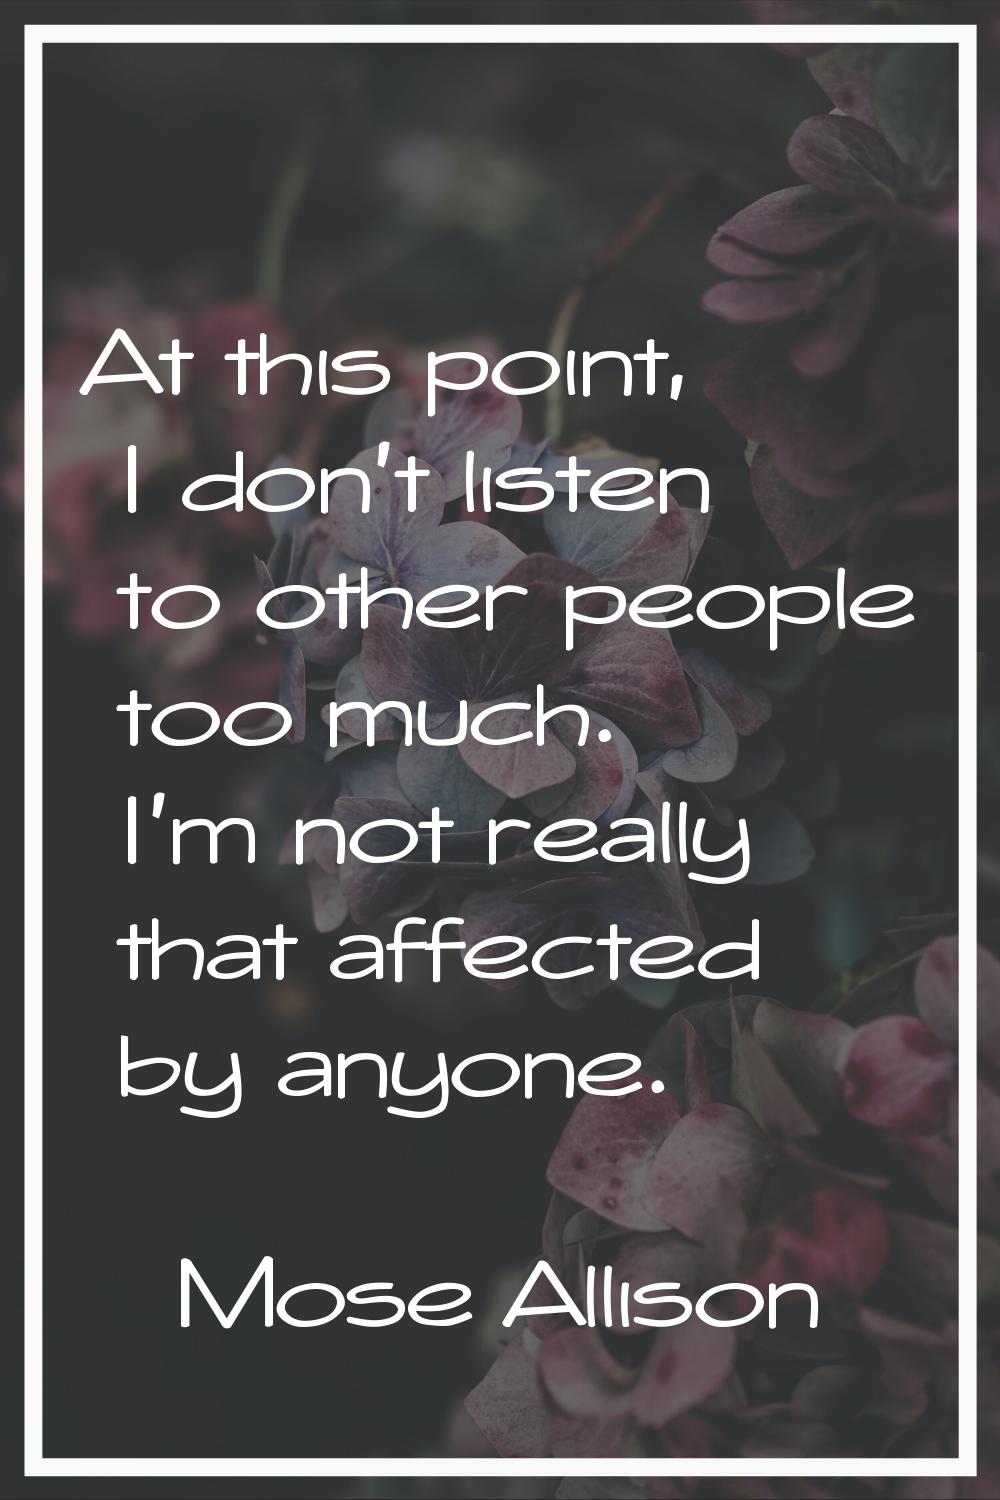 At this point, I don't listen to other people too much. I'm not really that affected by anyone.